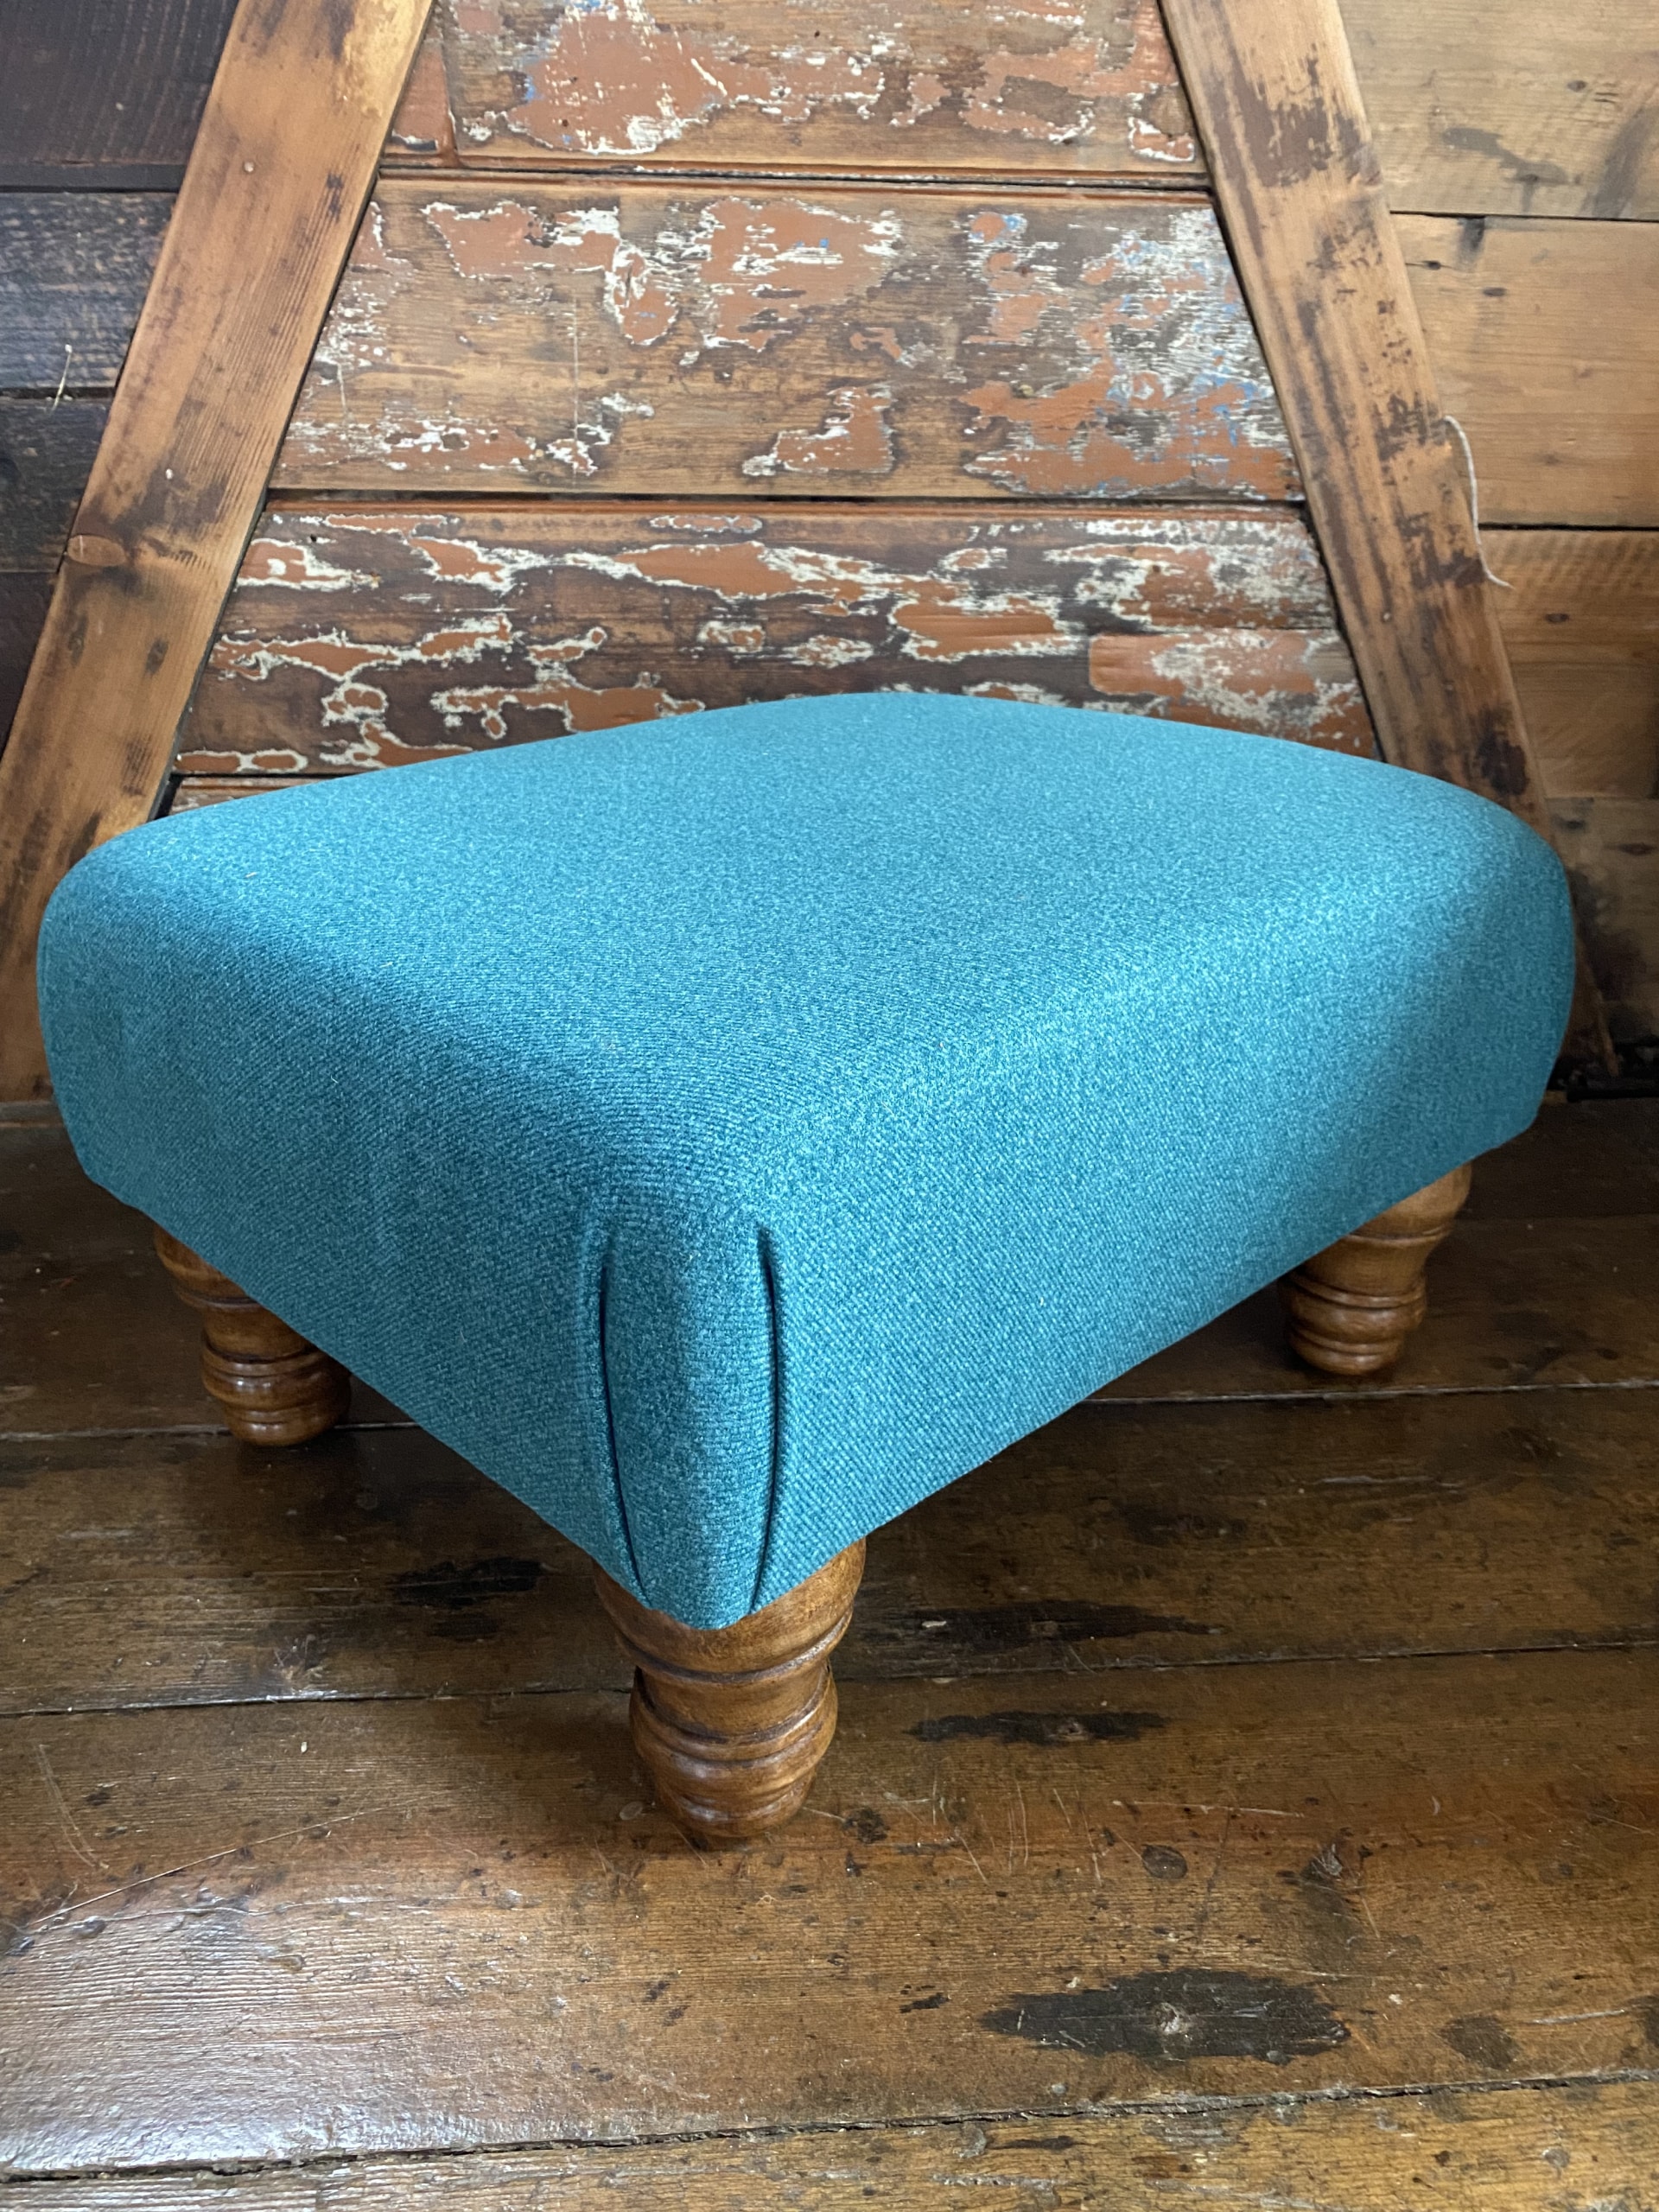 How to Recover an Upholstered Footstool - Techniques